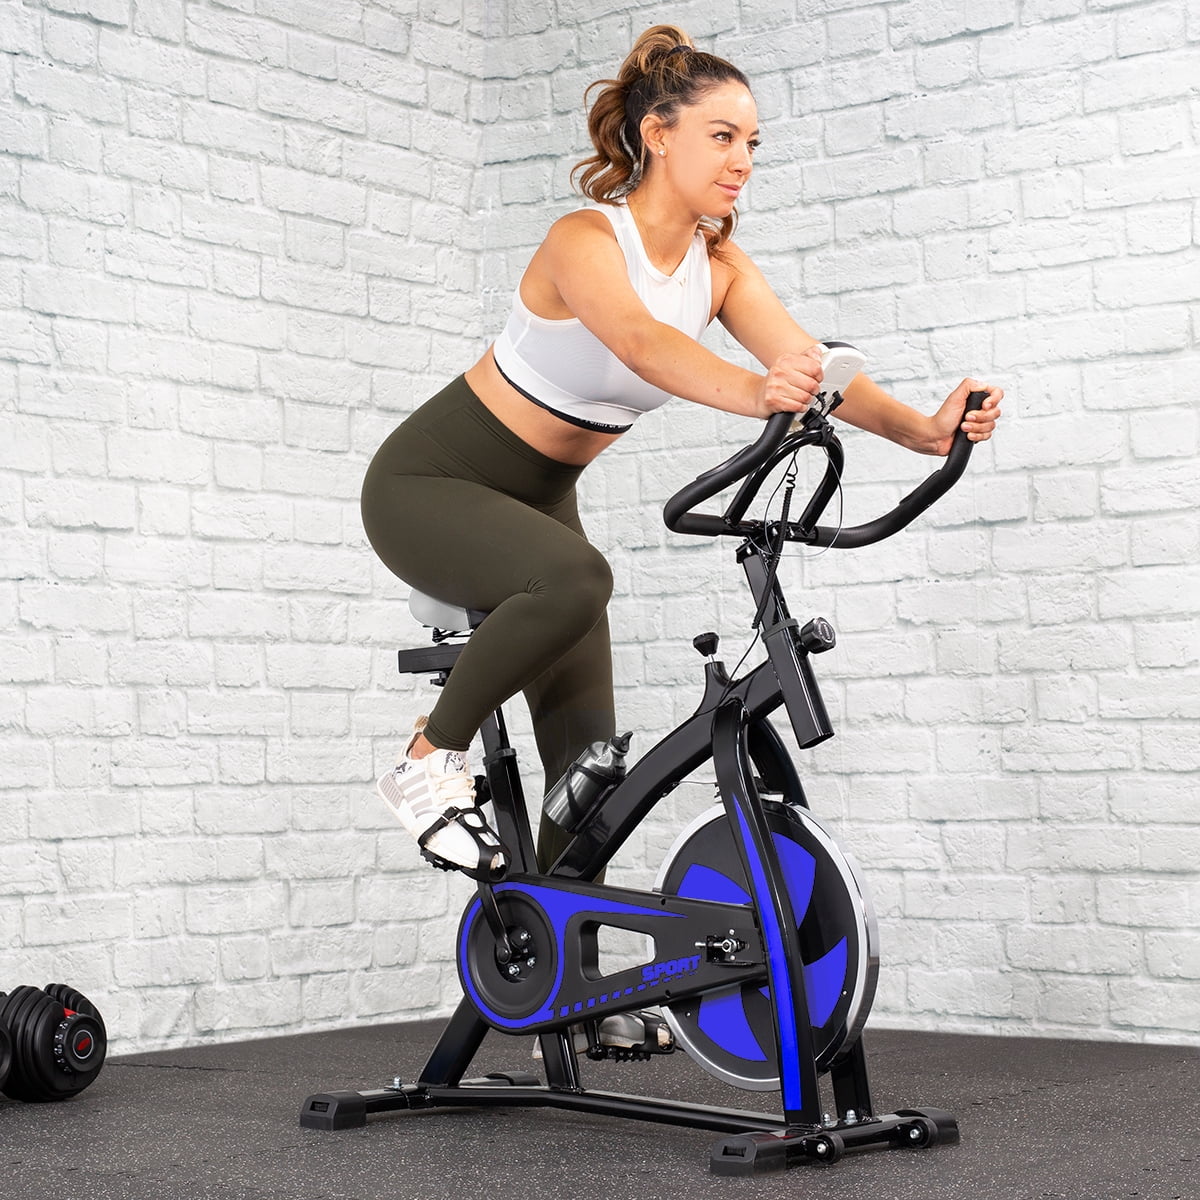 Details about   Stationary Exercise Fitness Bike Cycling Cardio Health Workout Indoor Training 